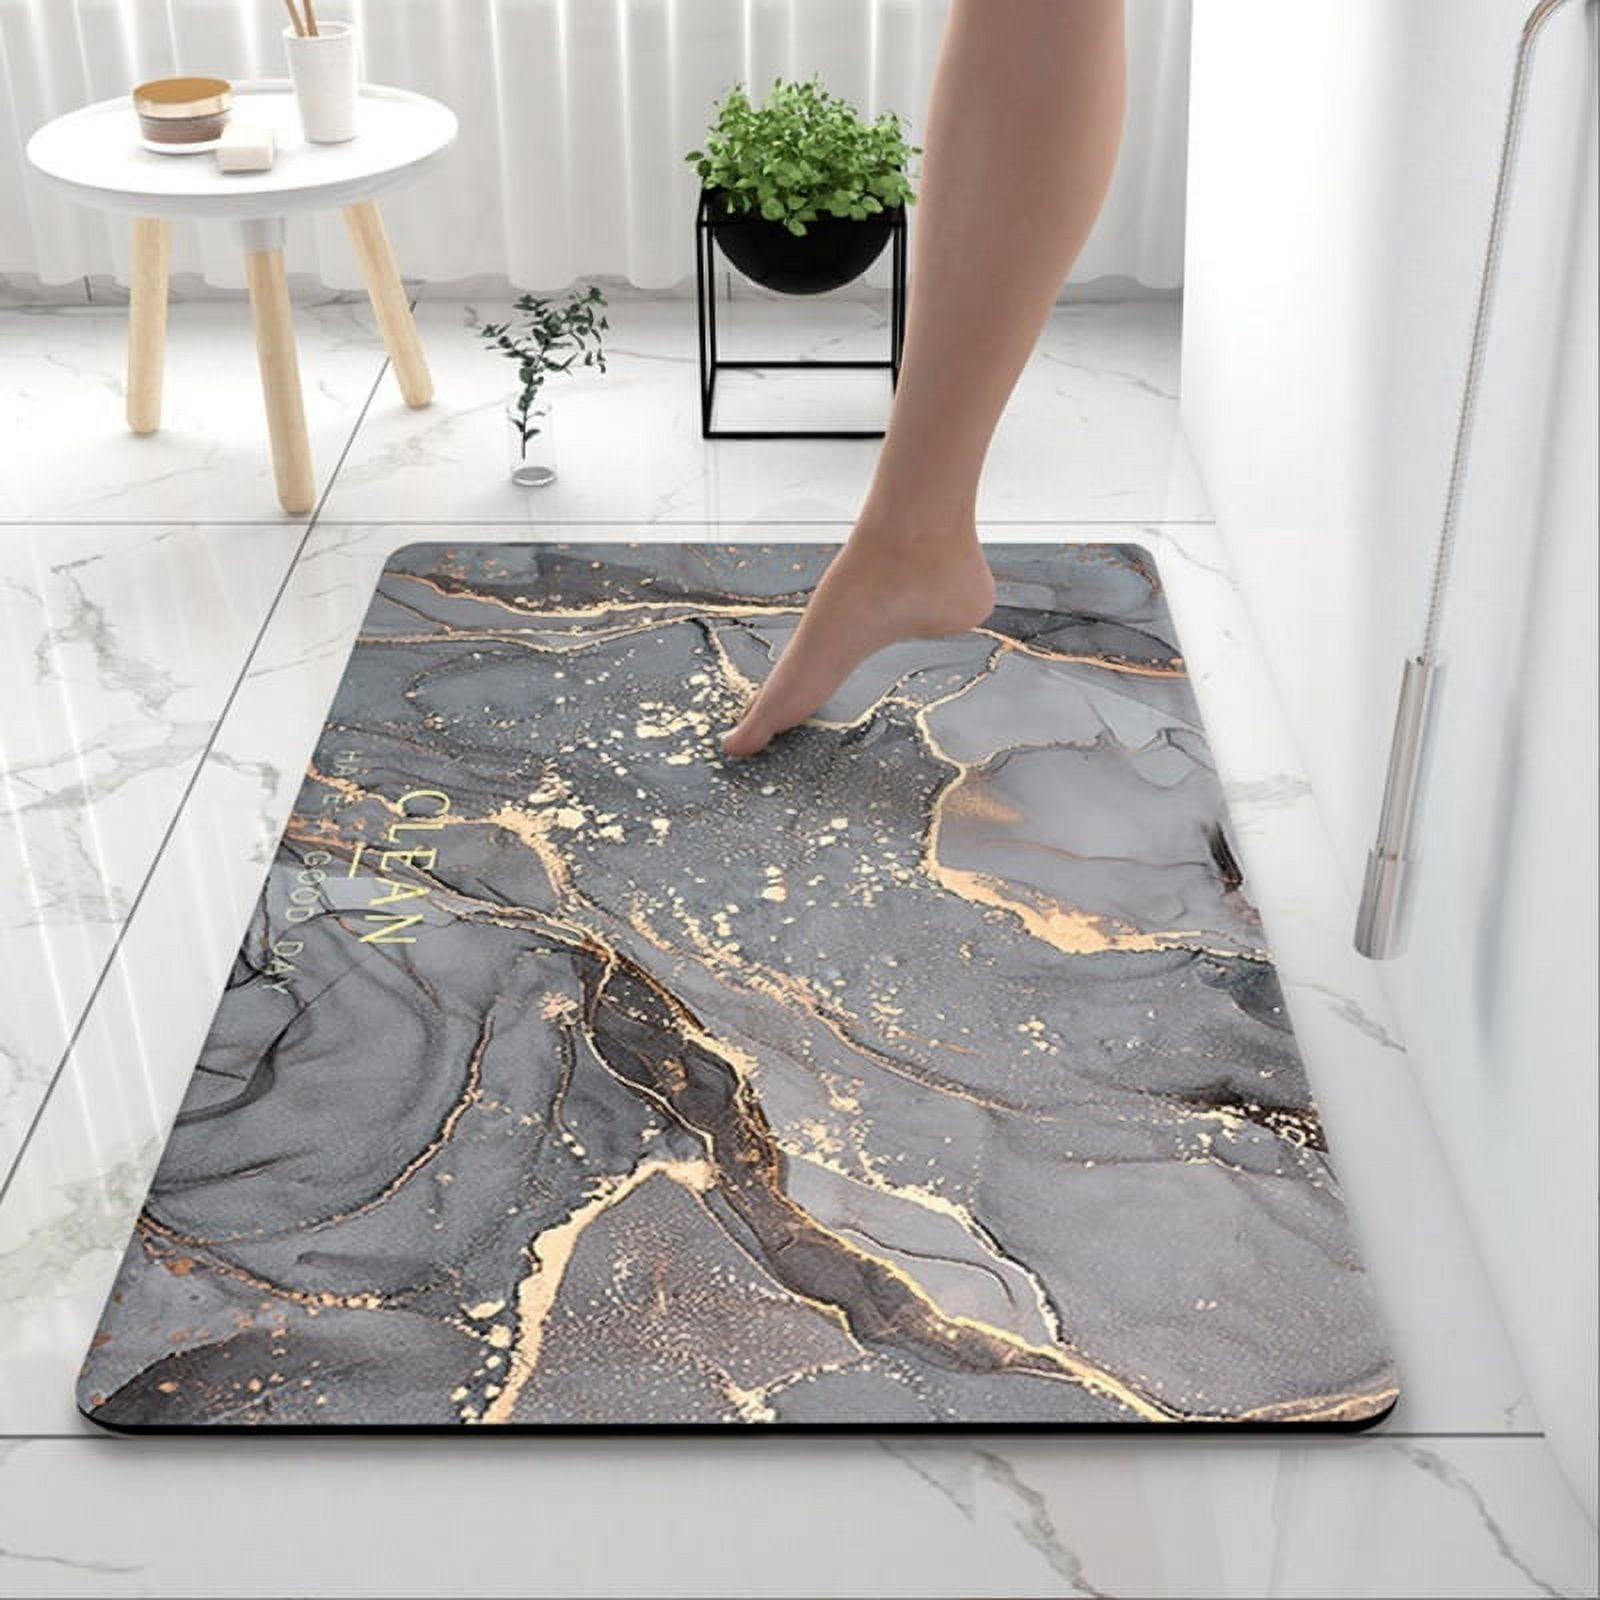 DJSOK Bath Mat Rug,Black White Gray and Gold Marble Non-Slip Super Absorbent Quick Drying Bathroom Floor Mat,Fit Under Door,Easy to Clean,Shower Rug for